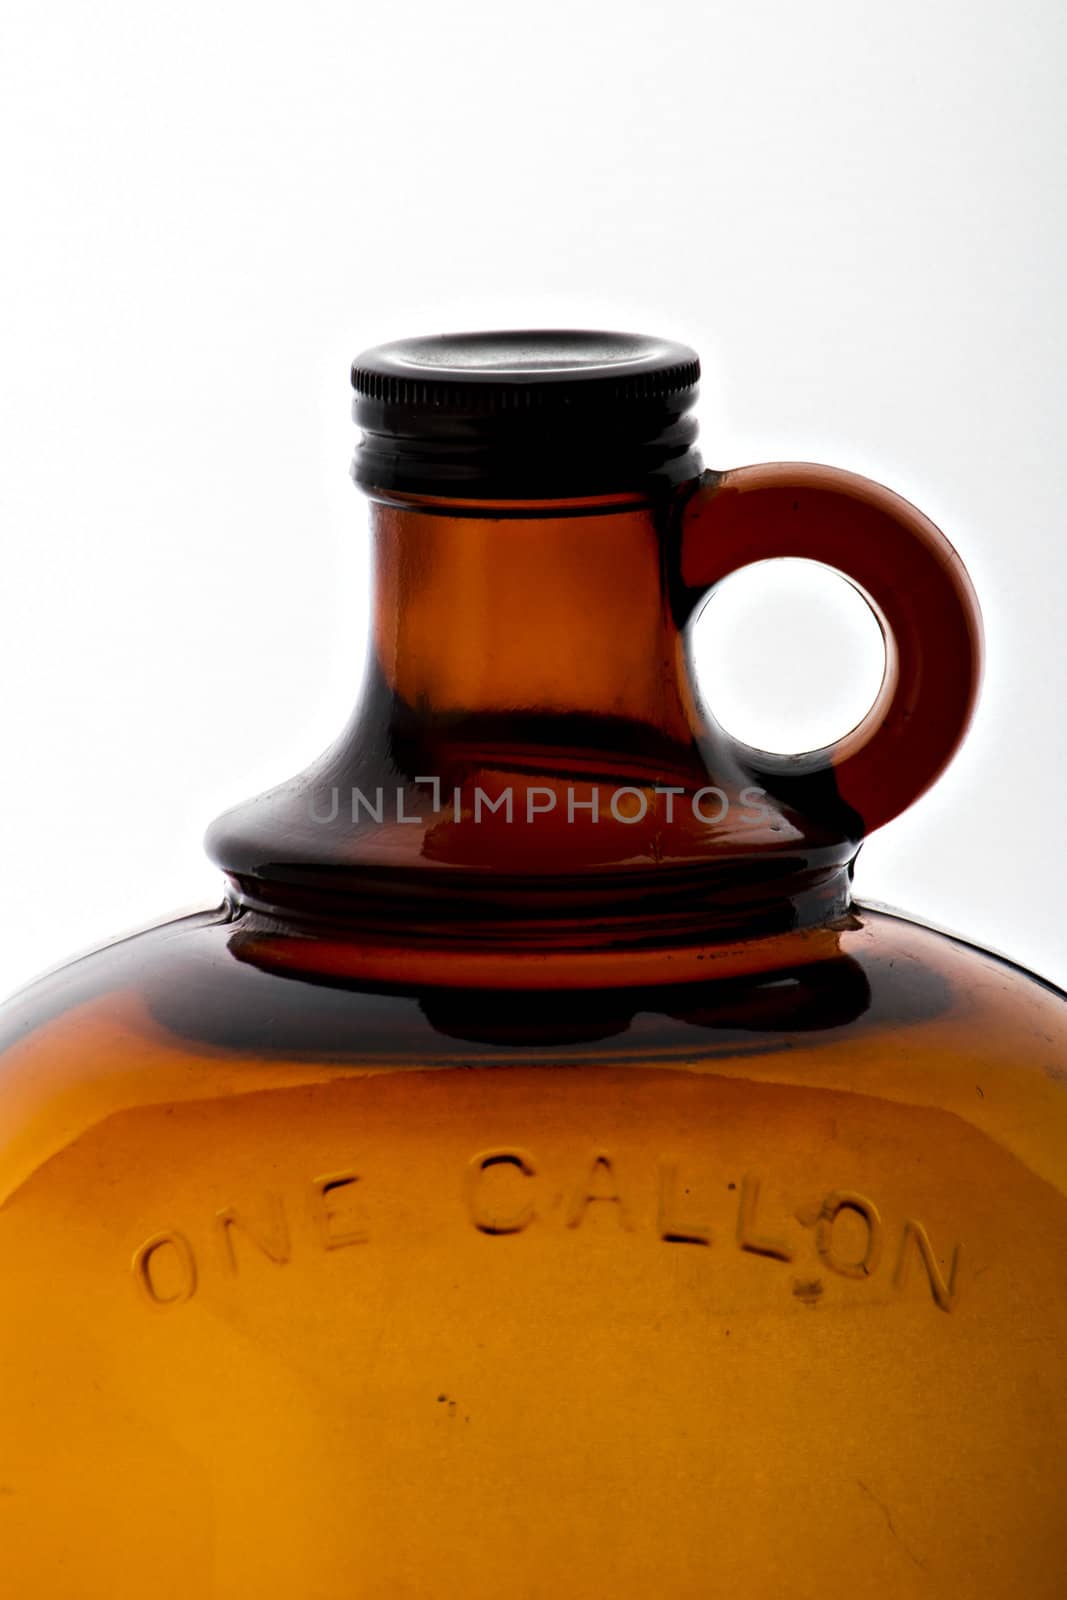 A single gallon jug that can contain whiskey in it